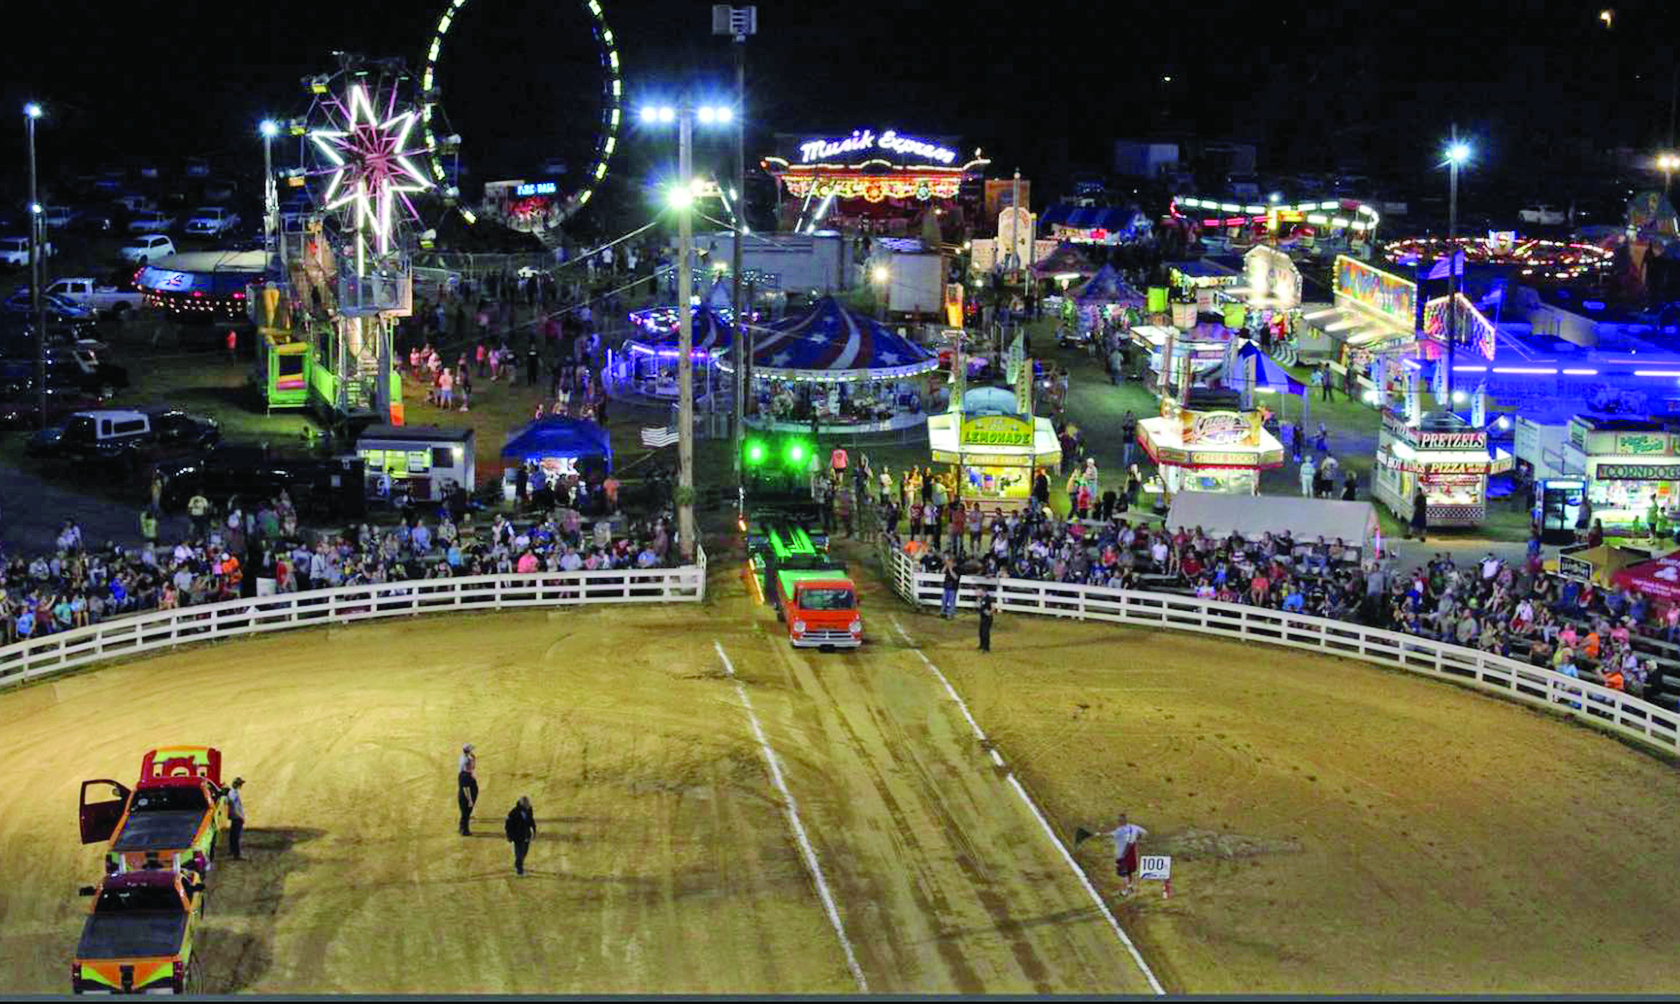 76th Annual Greenup County Fair On Its Way